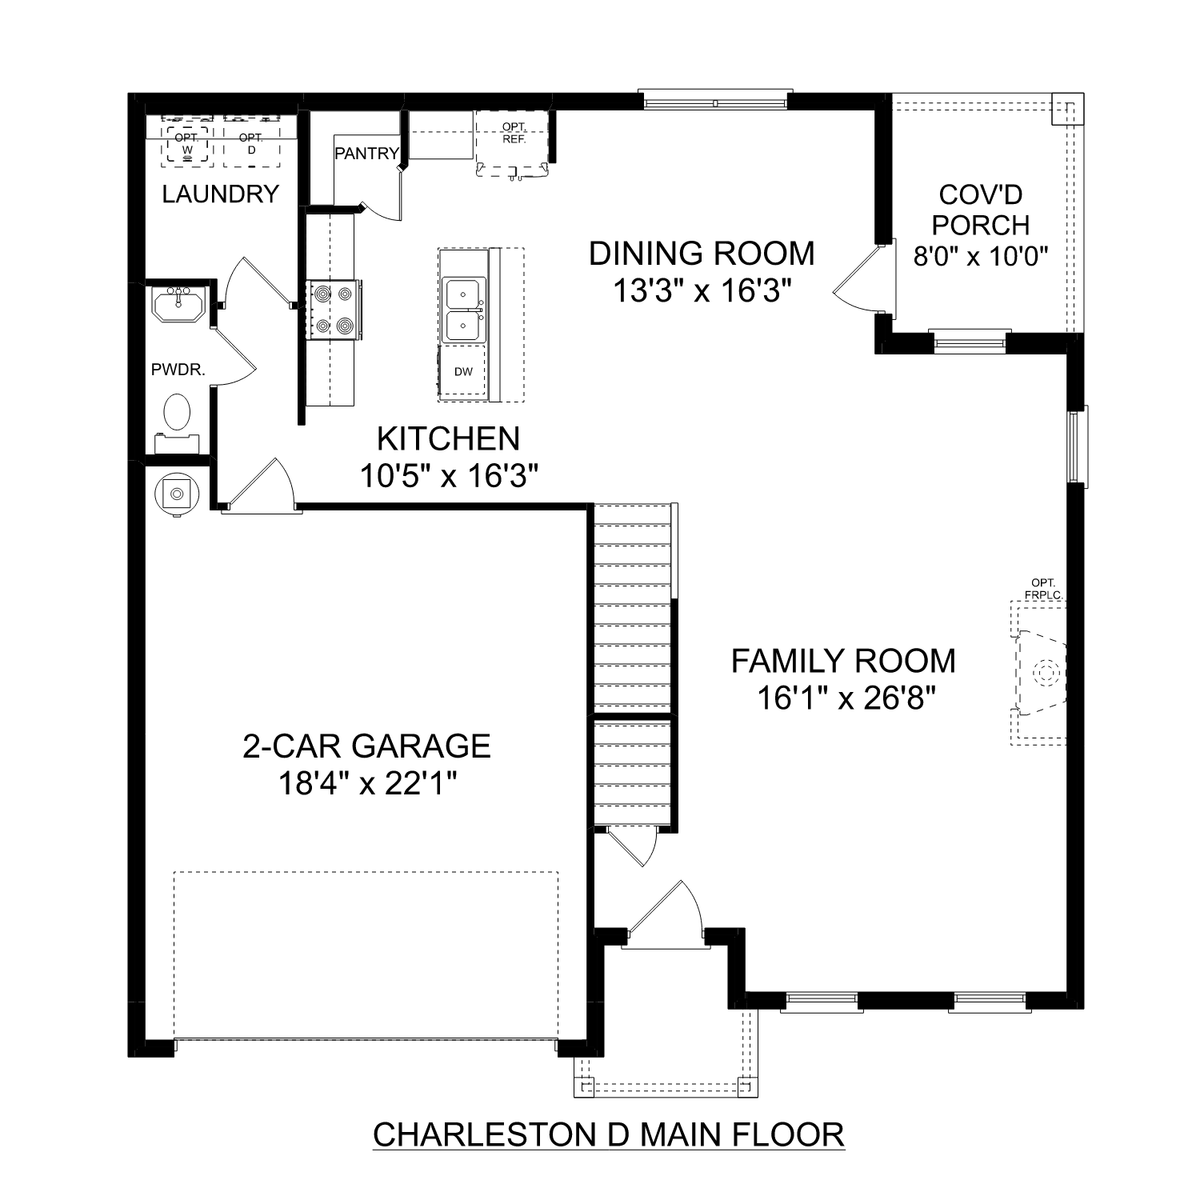 1 - The Charleston D buildable floor plan layout in Davidson Homes' Ricketts Farm community.